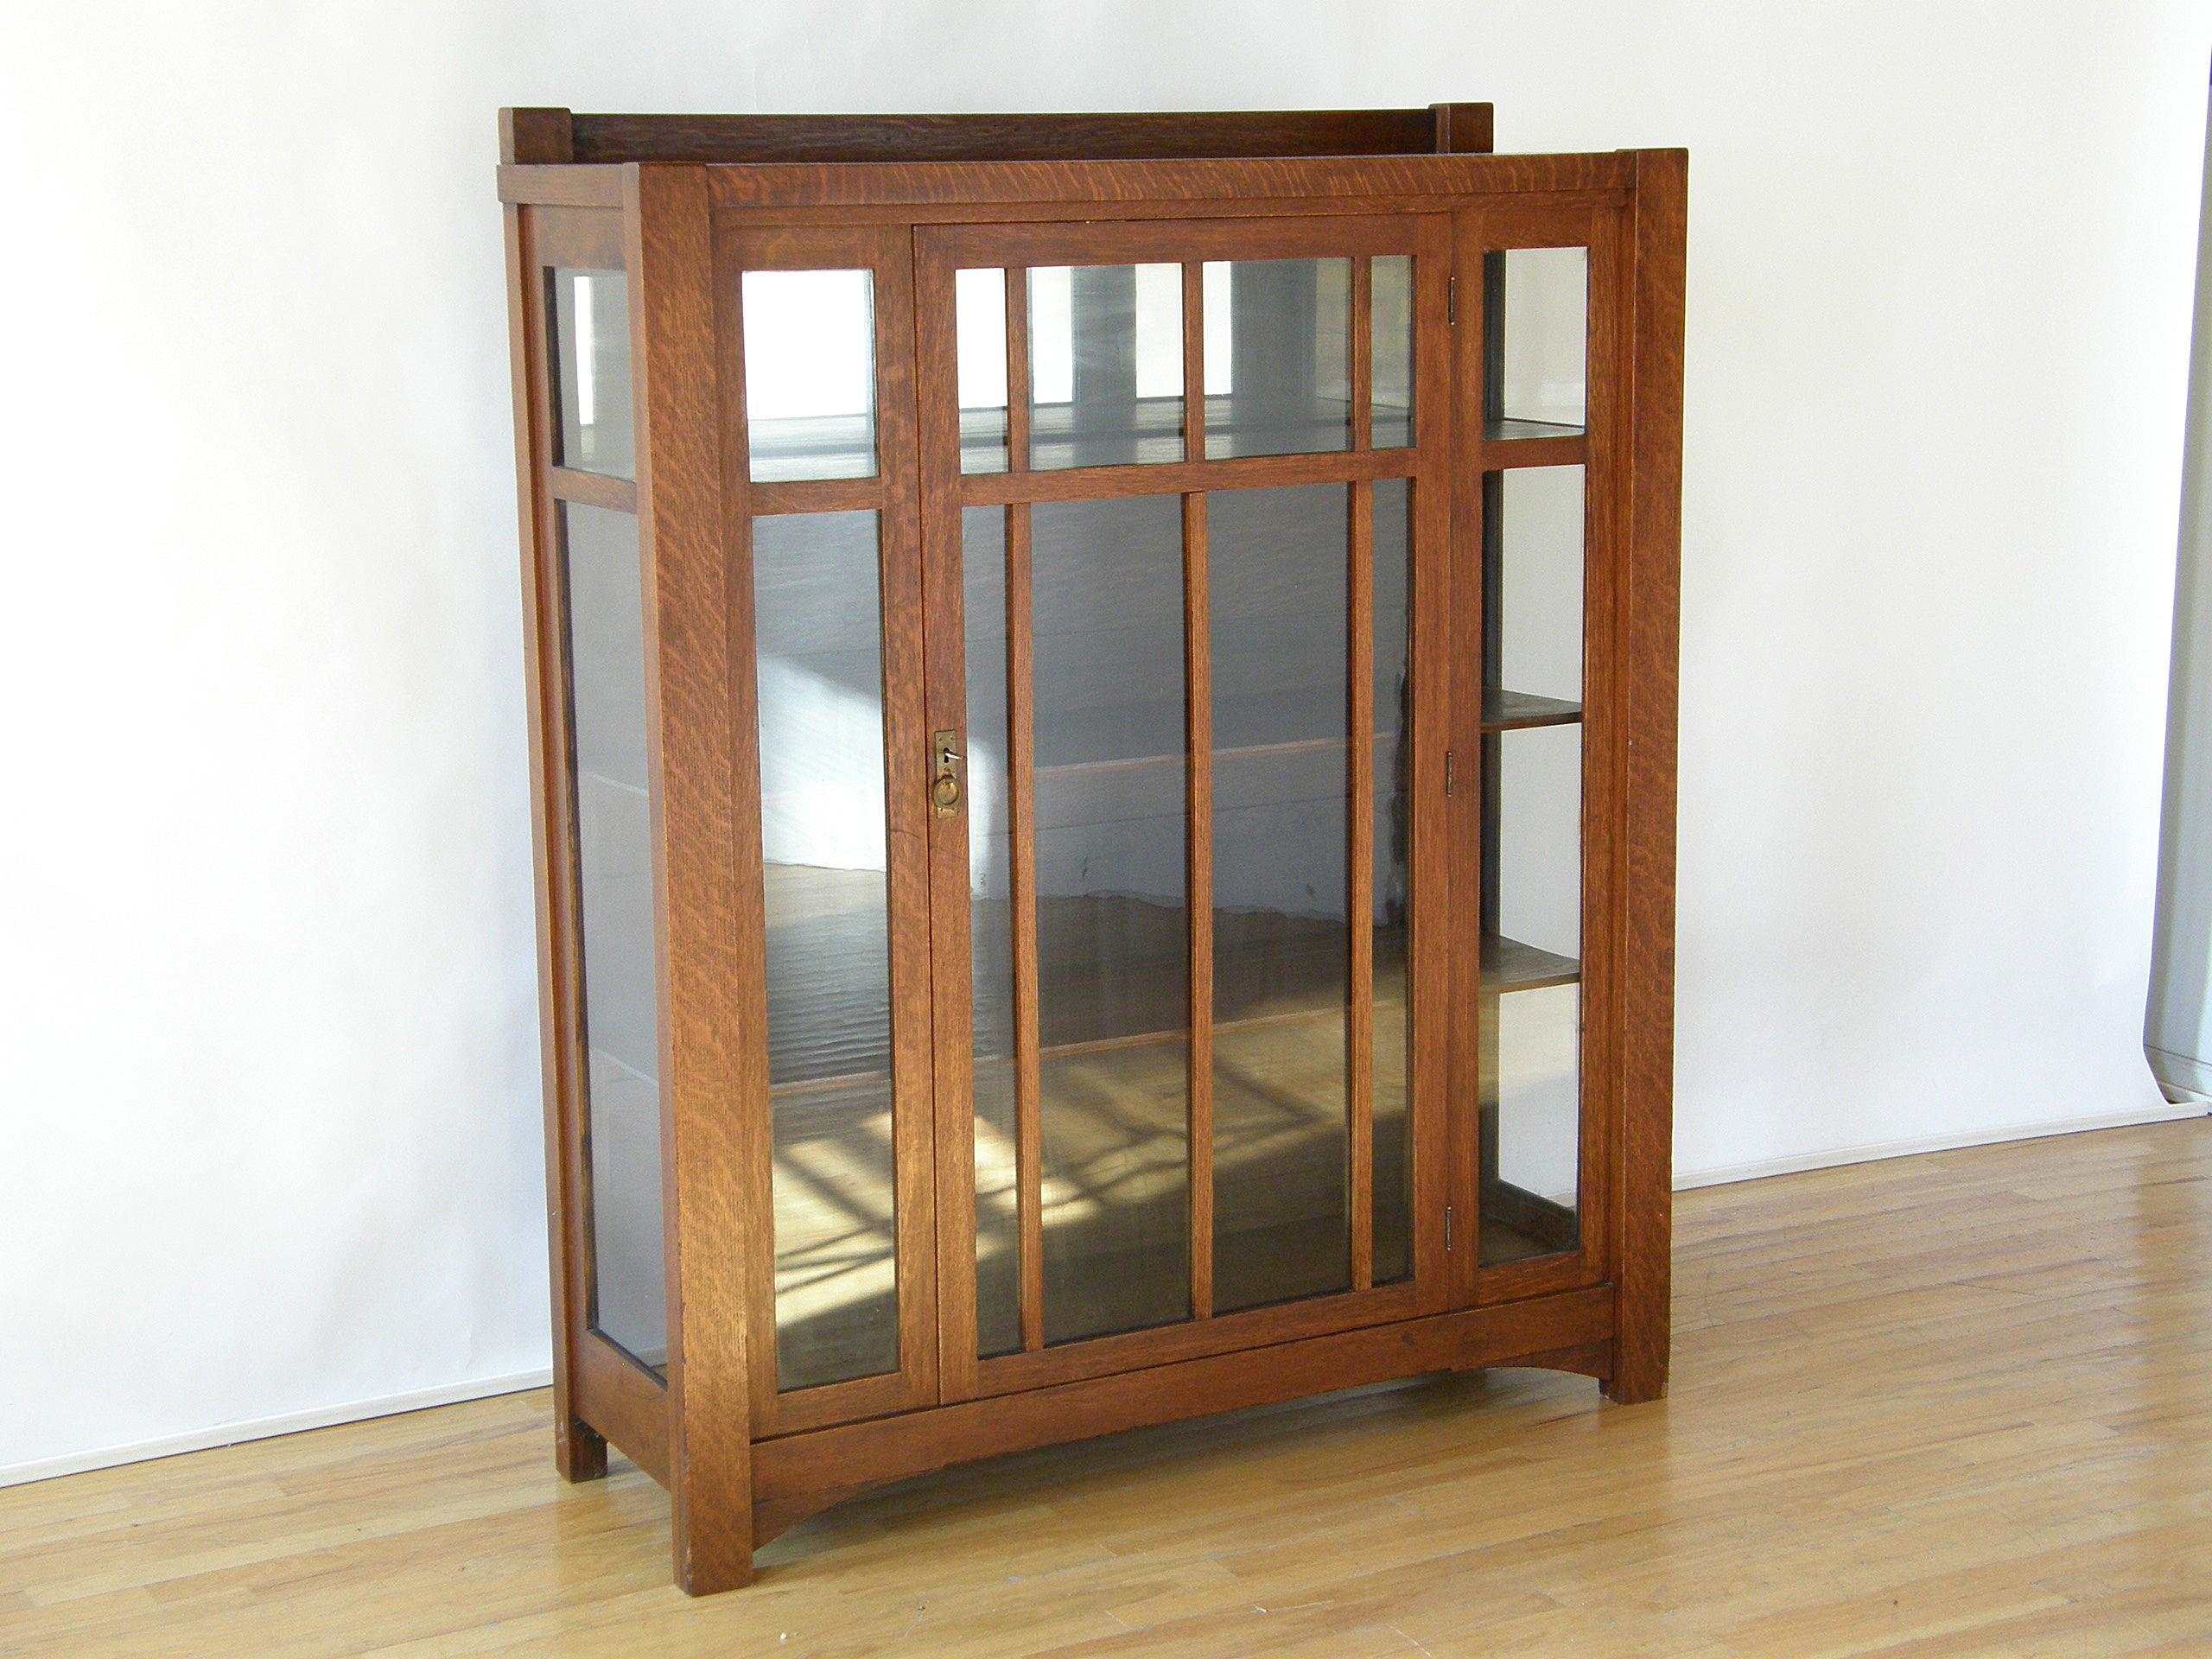 This handsome, Mission oak china cabinet or bookcase has a Classic Arts & Crafts style. The thick corner supports continue down to form the legs, and the back two extend above the top and flank a back panel to provide a more finished look to the